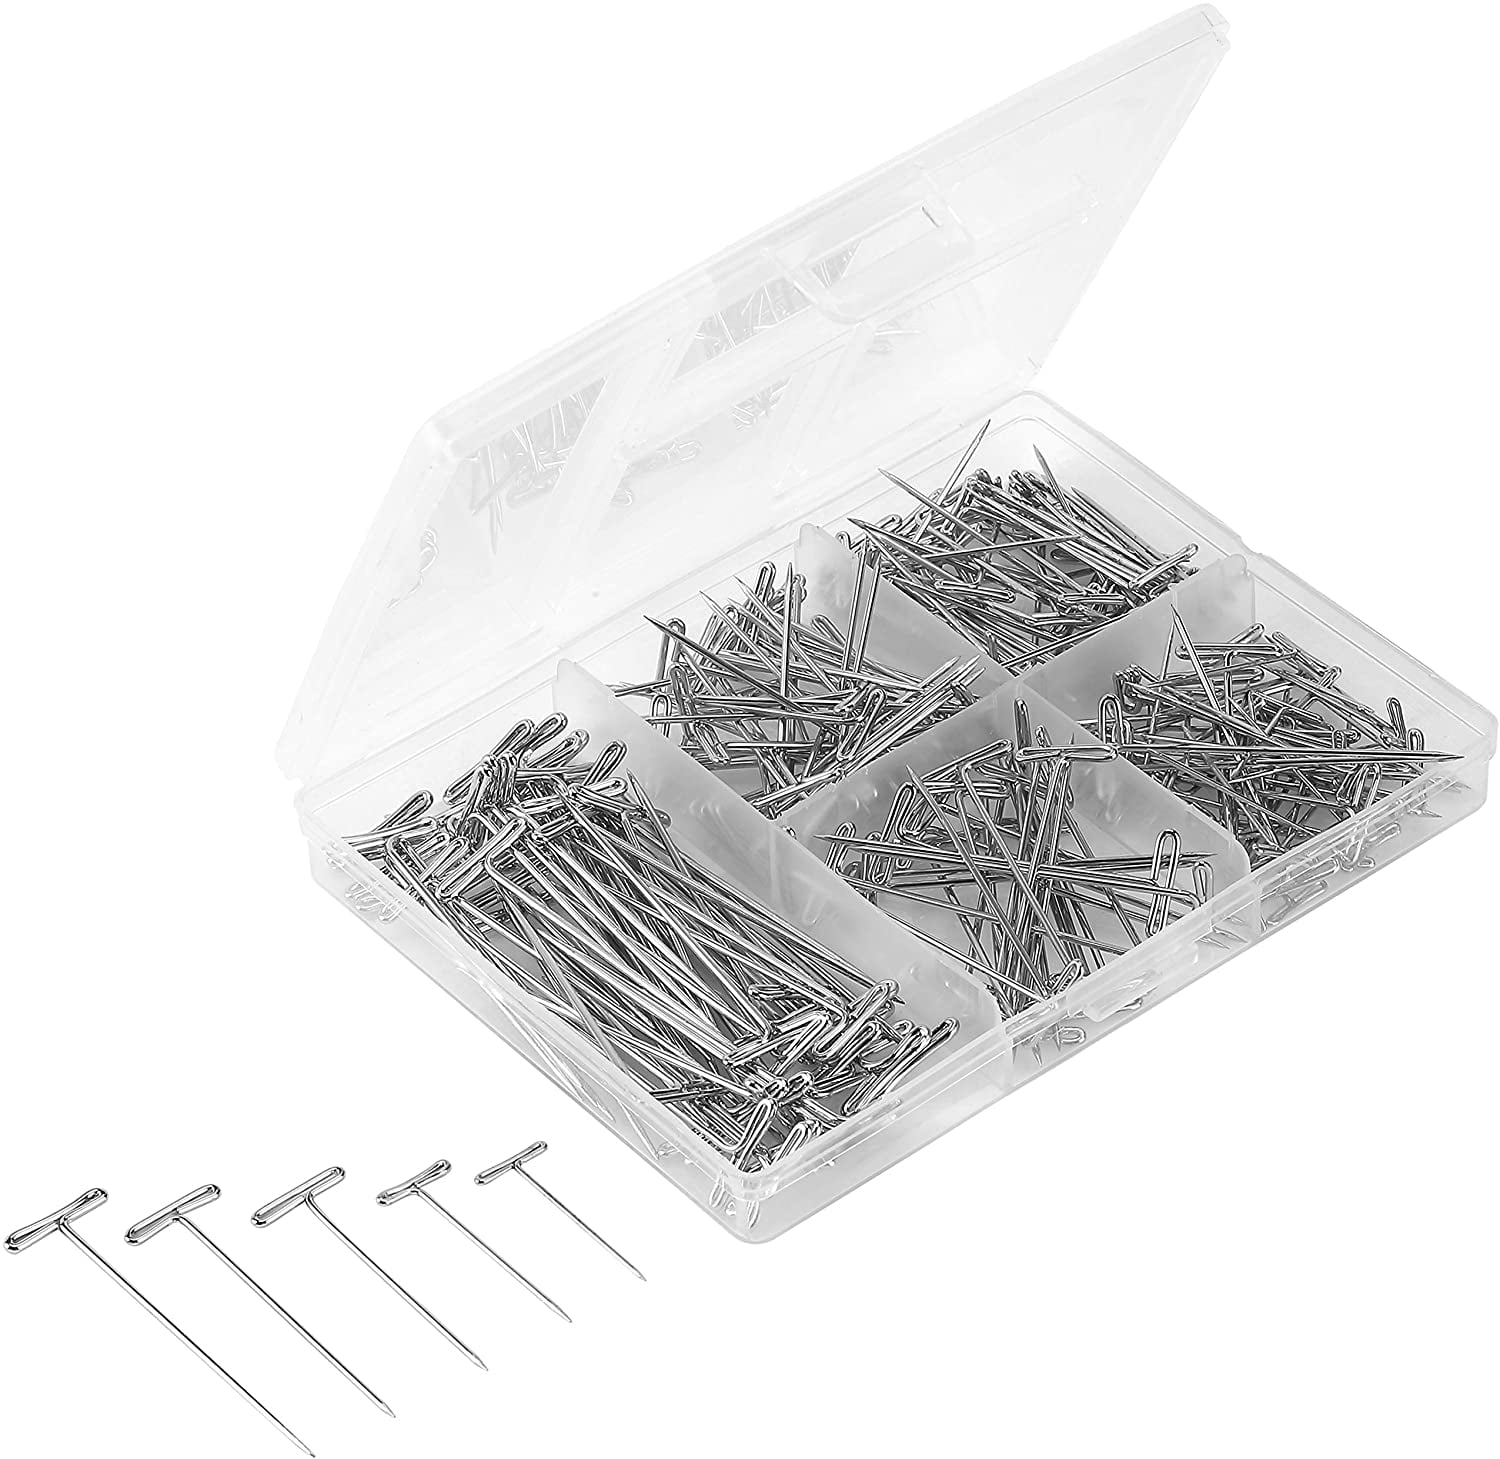 150 Pieces Premium Quality Nickel Plated Dissection Pins Frog Dissection Pins T Pins 100 Pack 1.5 inches and 50 Pack 2.0 inches